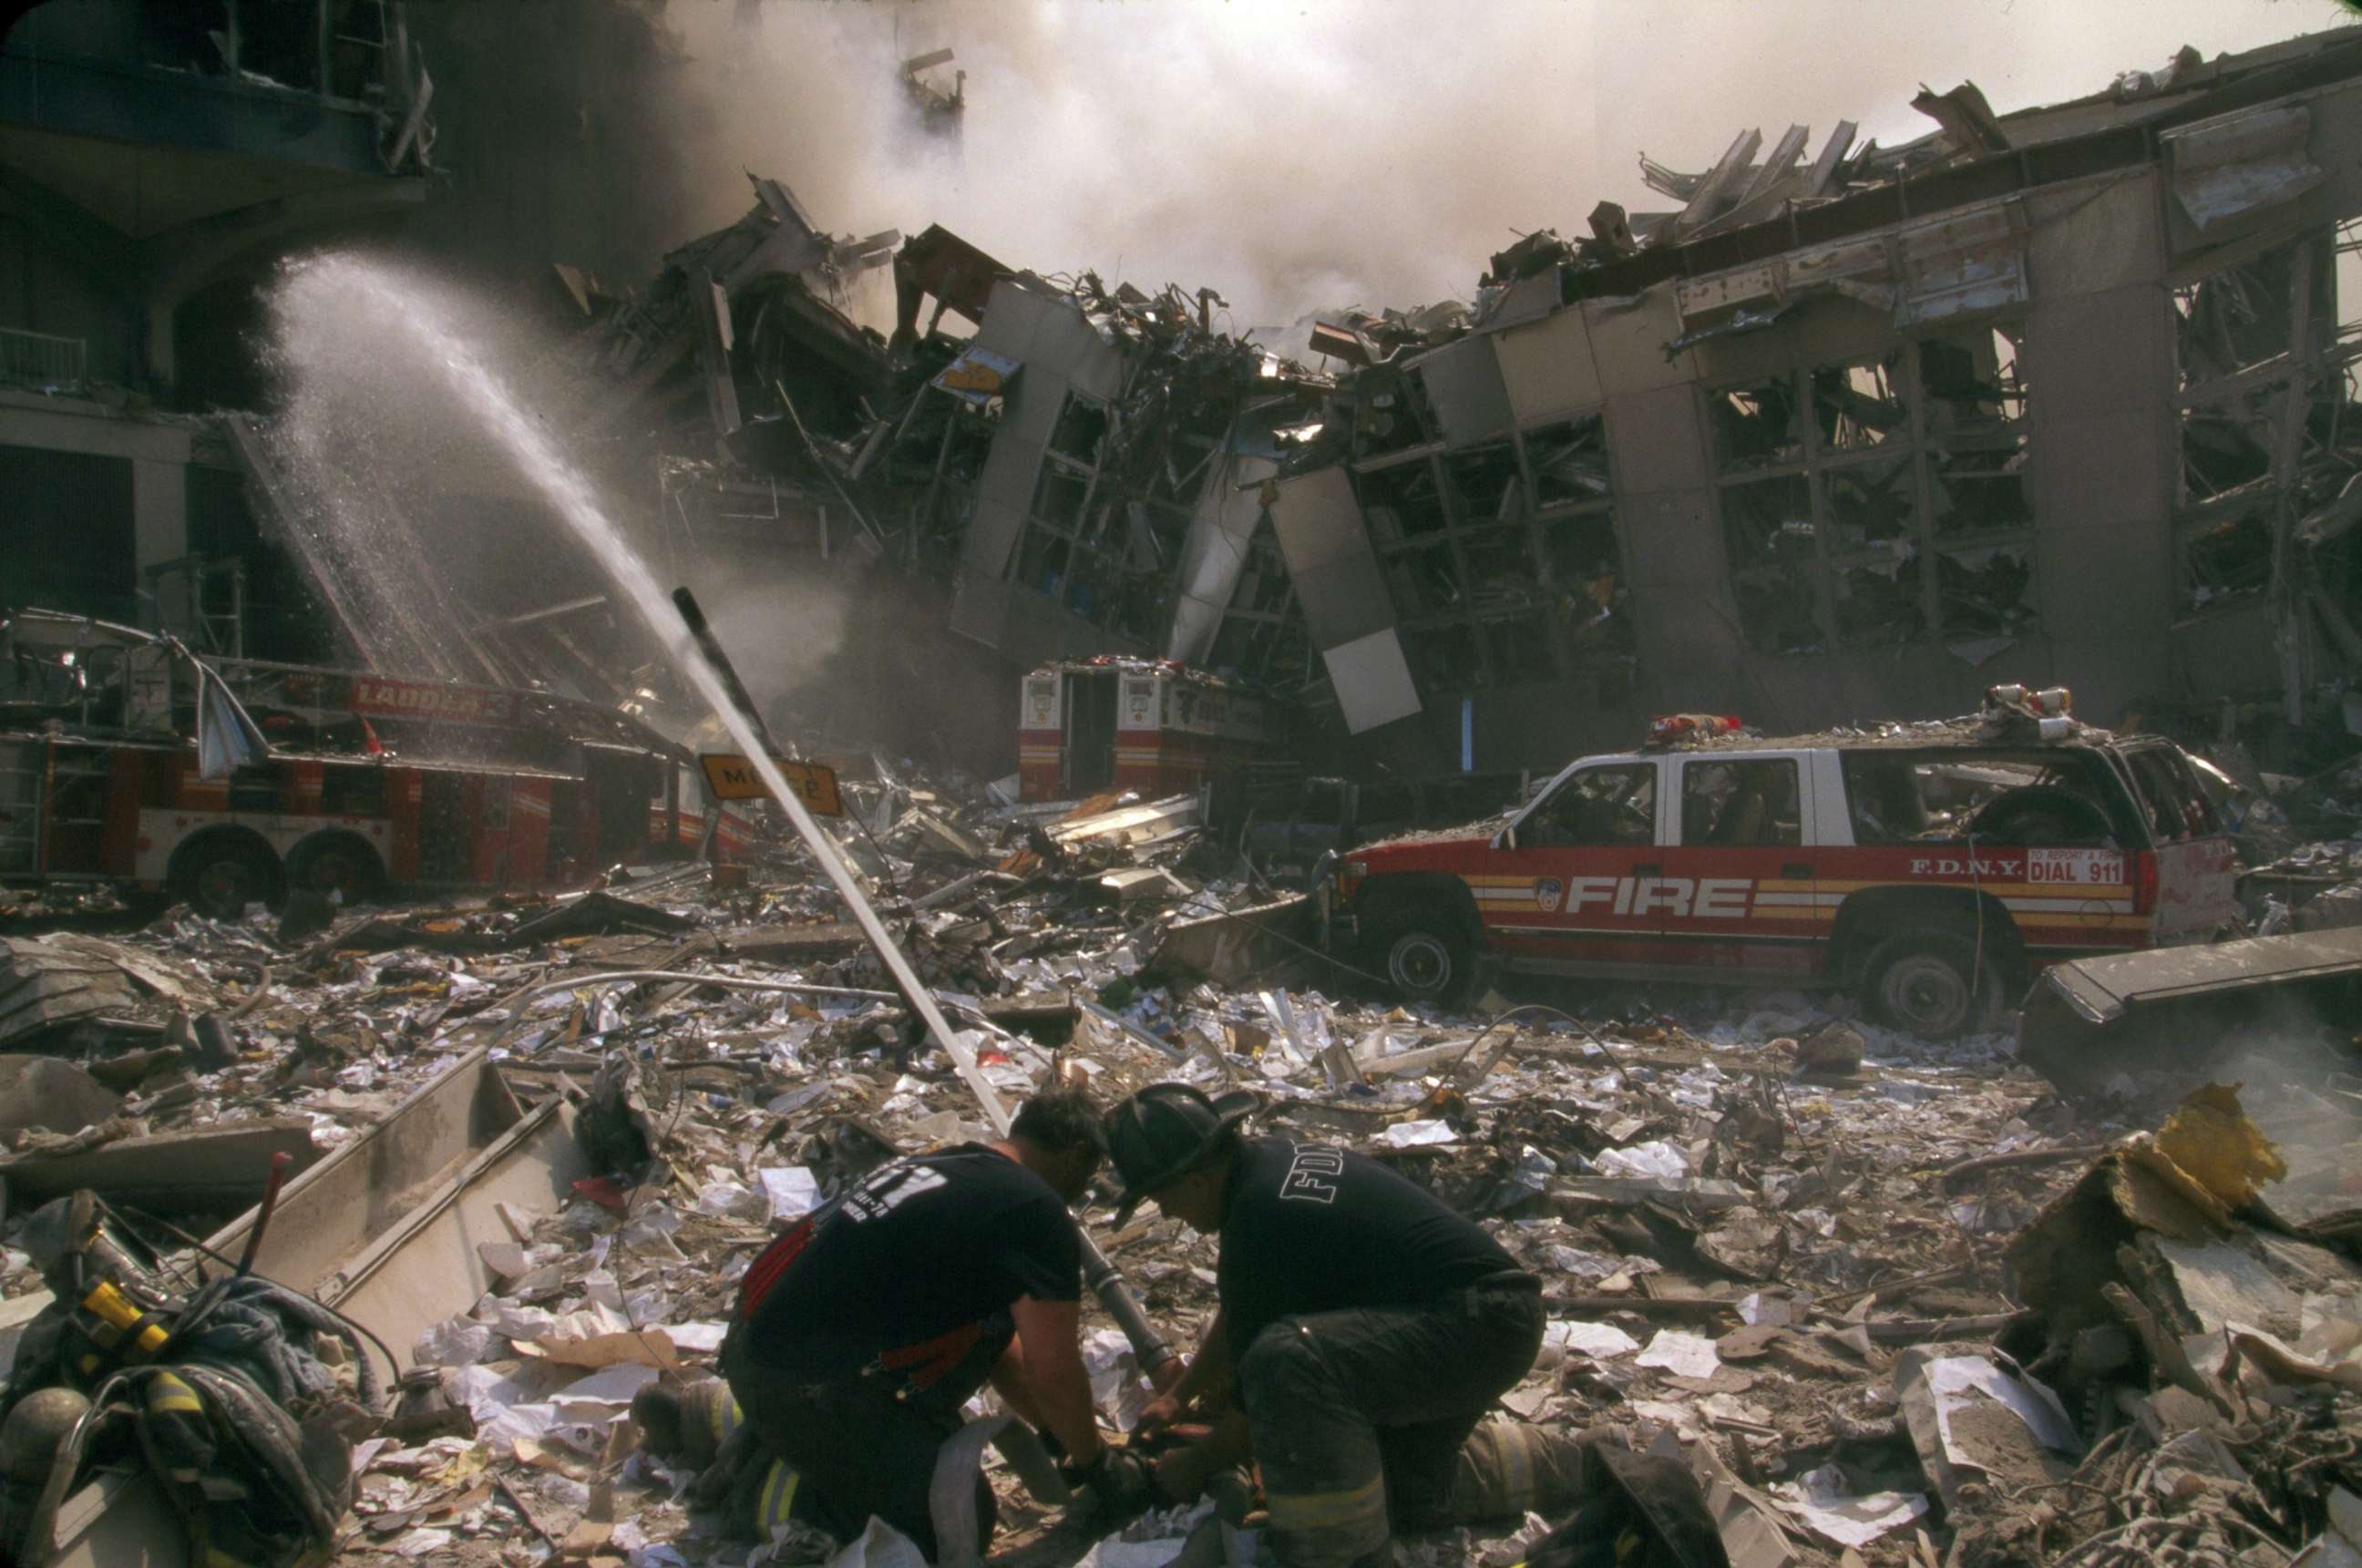 PHOTO: Fire fighters in the aftermath of the September 11th terrorist attack on the World Trade Center in New York City, 2001.